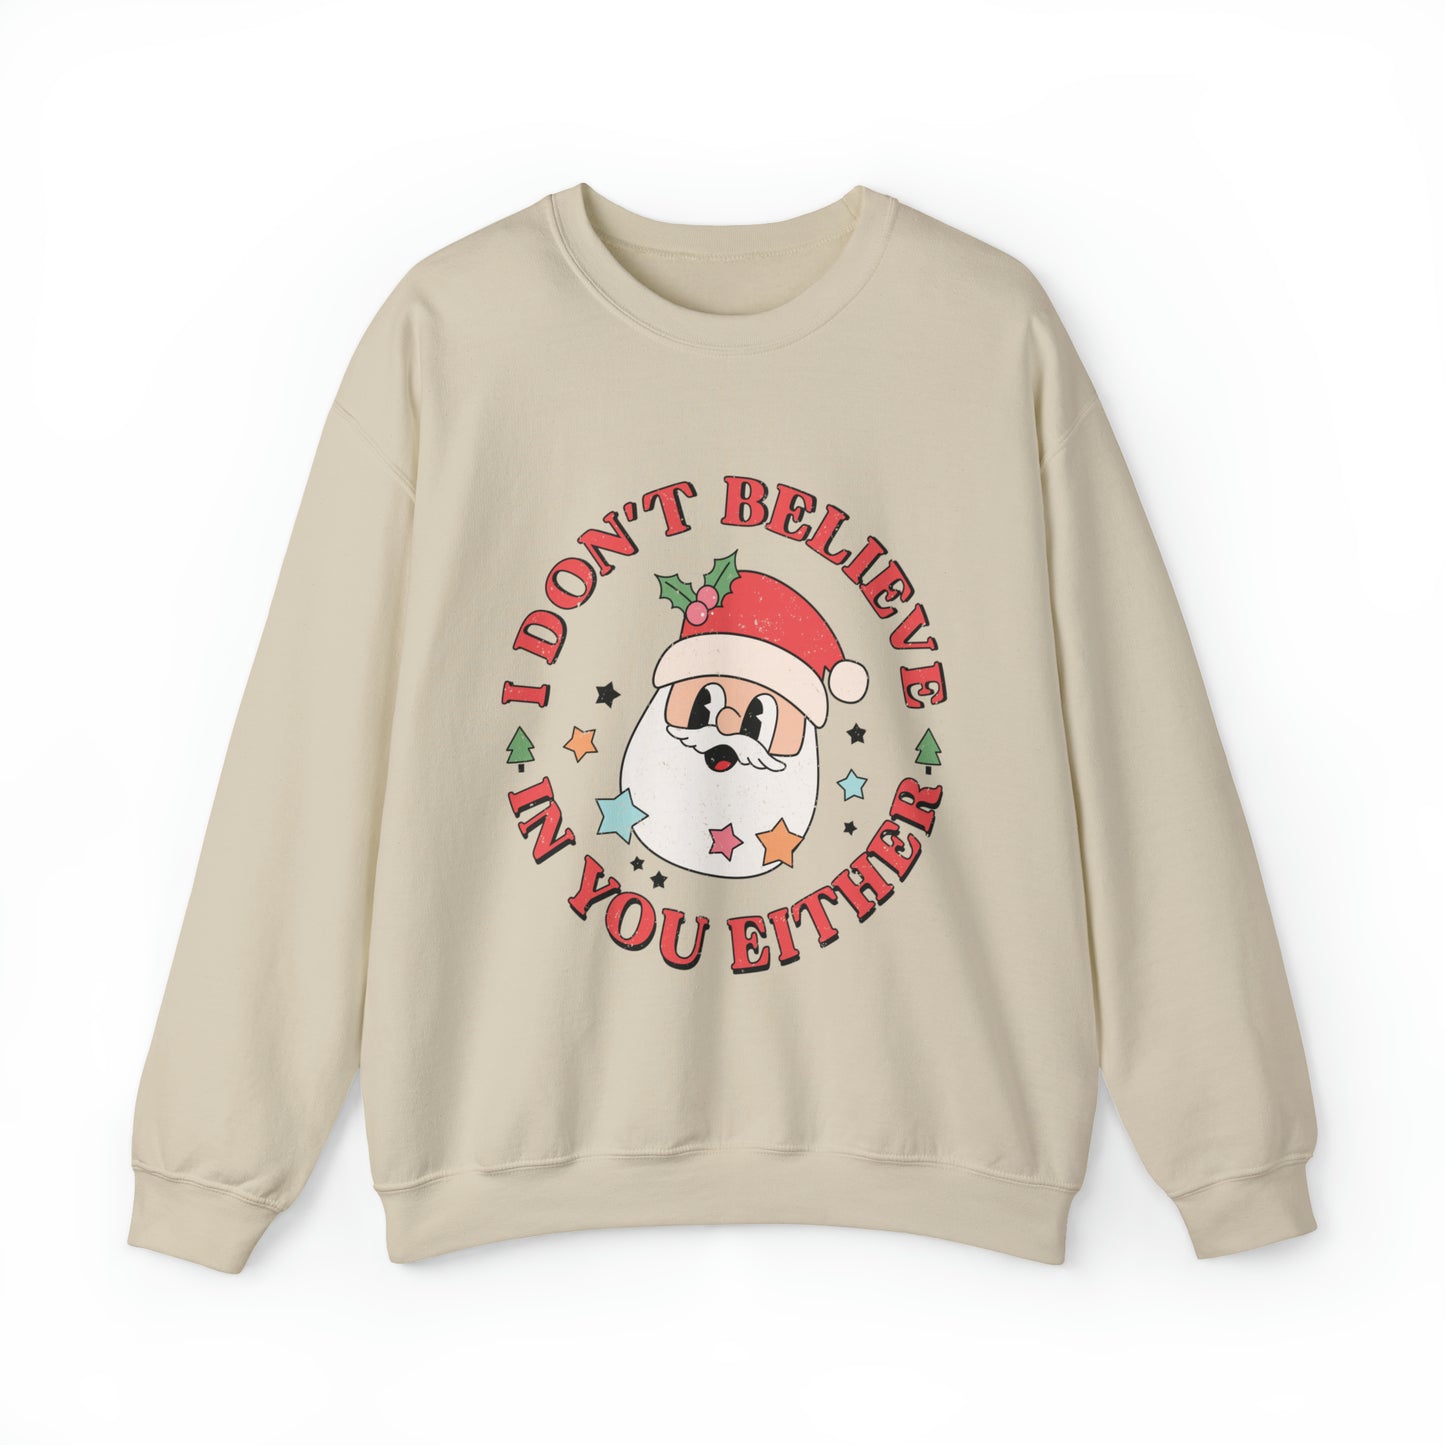 I don't believe in you either Women's funny Santa Christmas Crewneck Sweatshirt